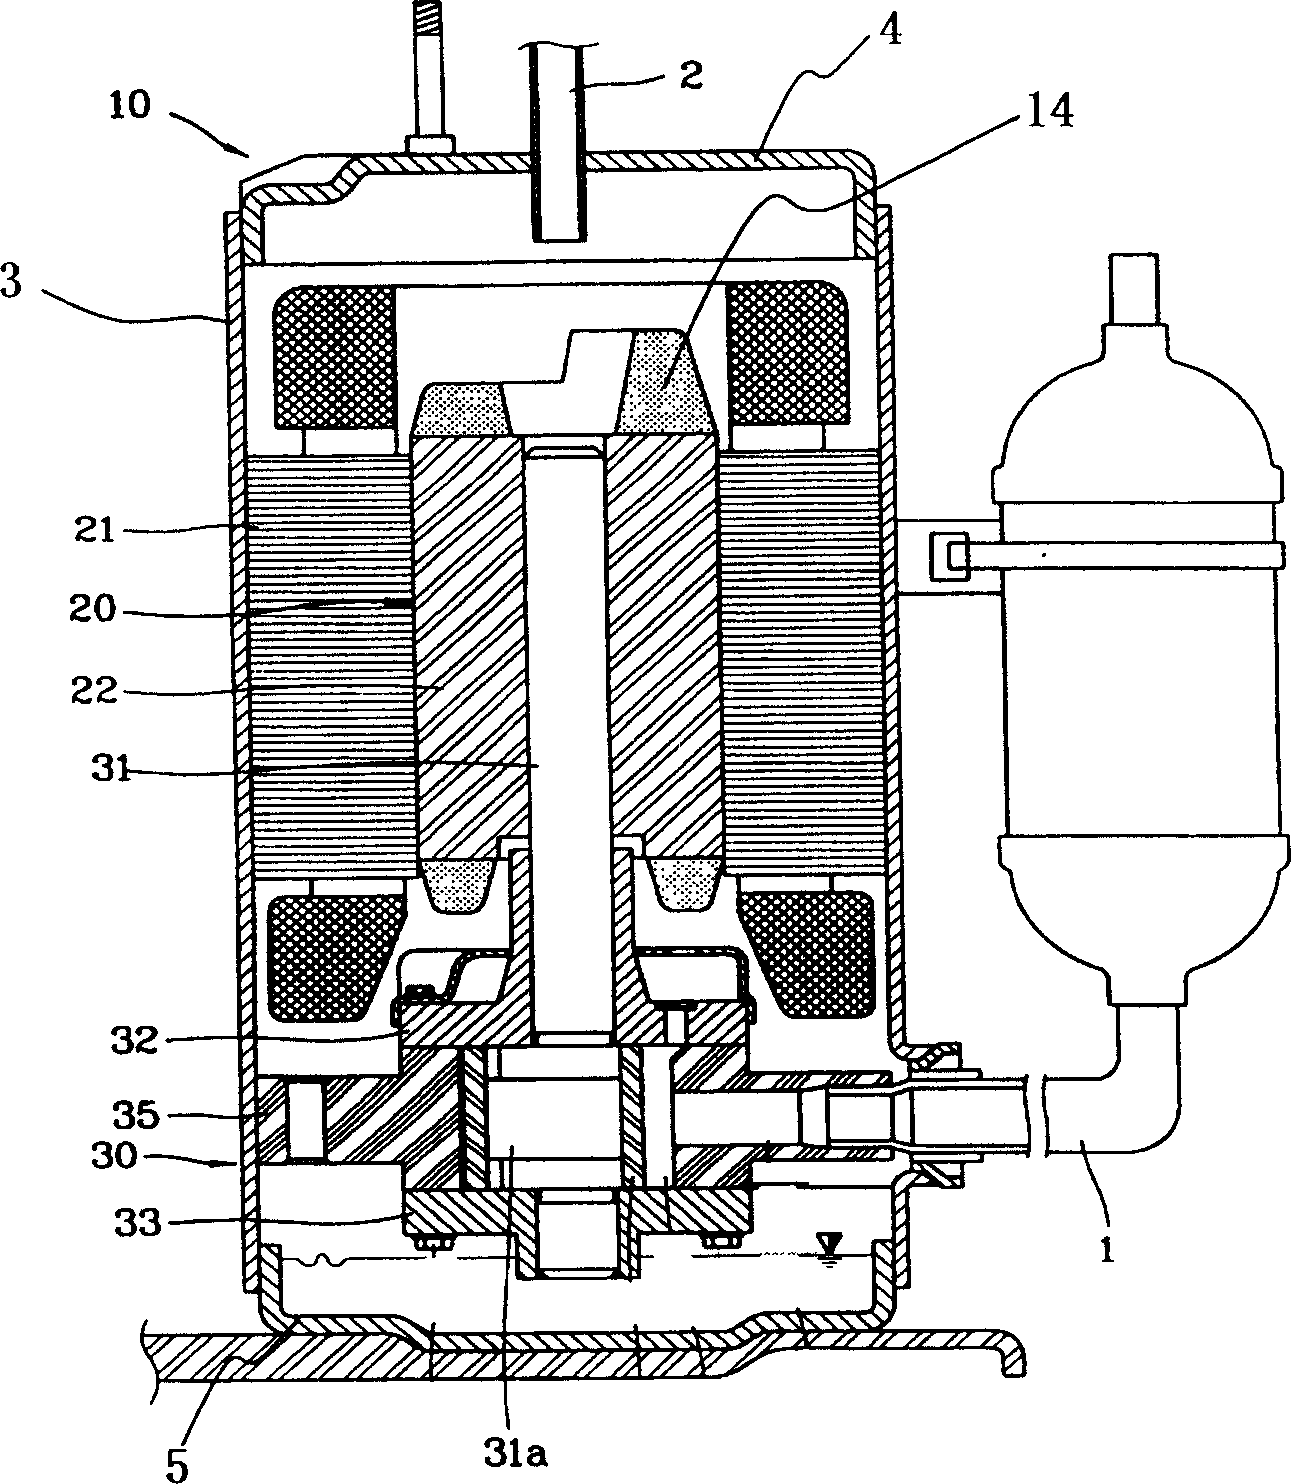 Motor rotor counterbalance structure for compressor